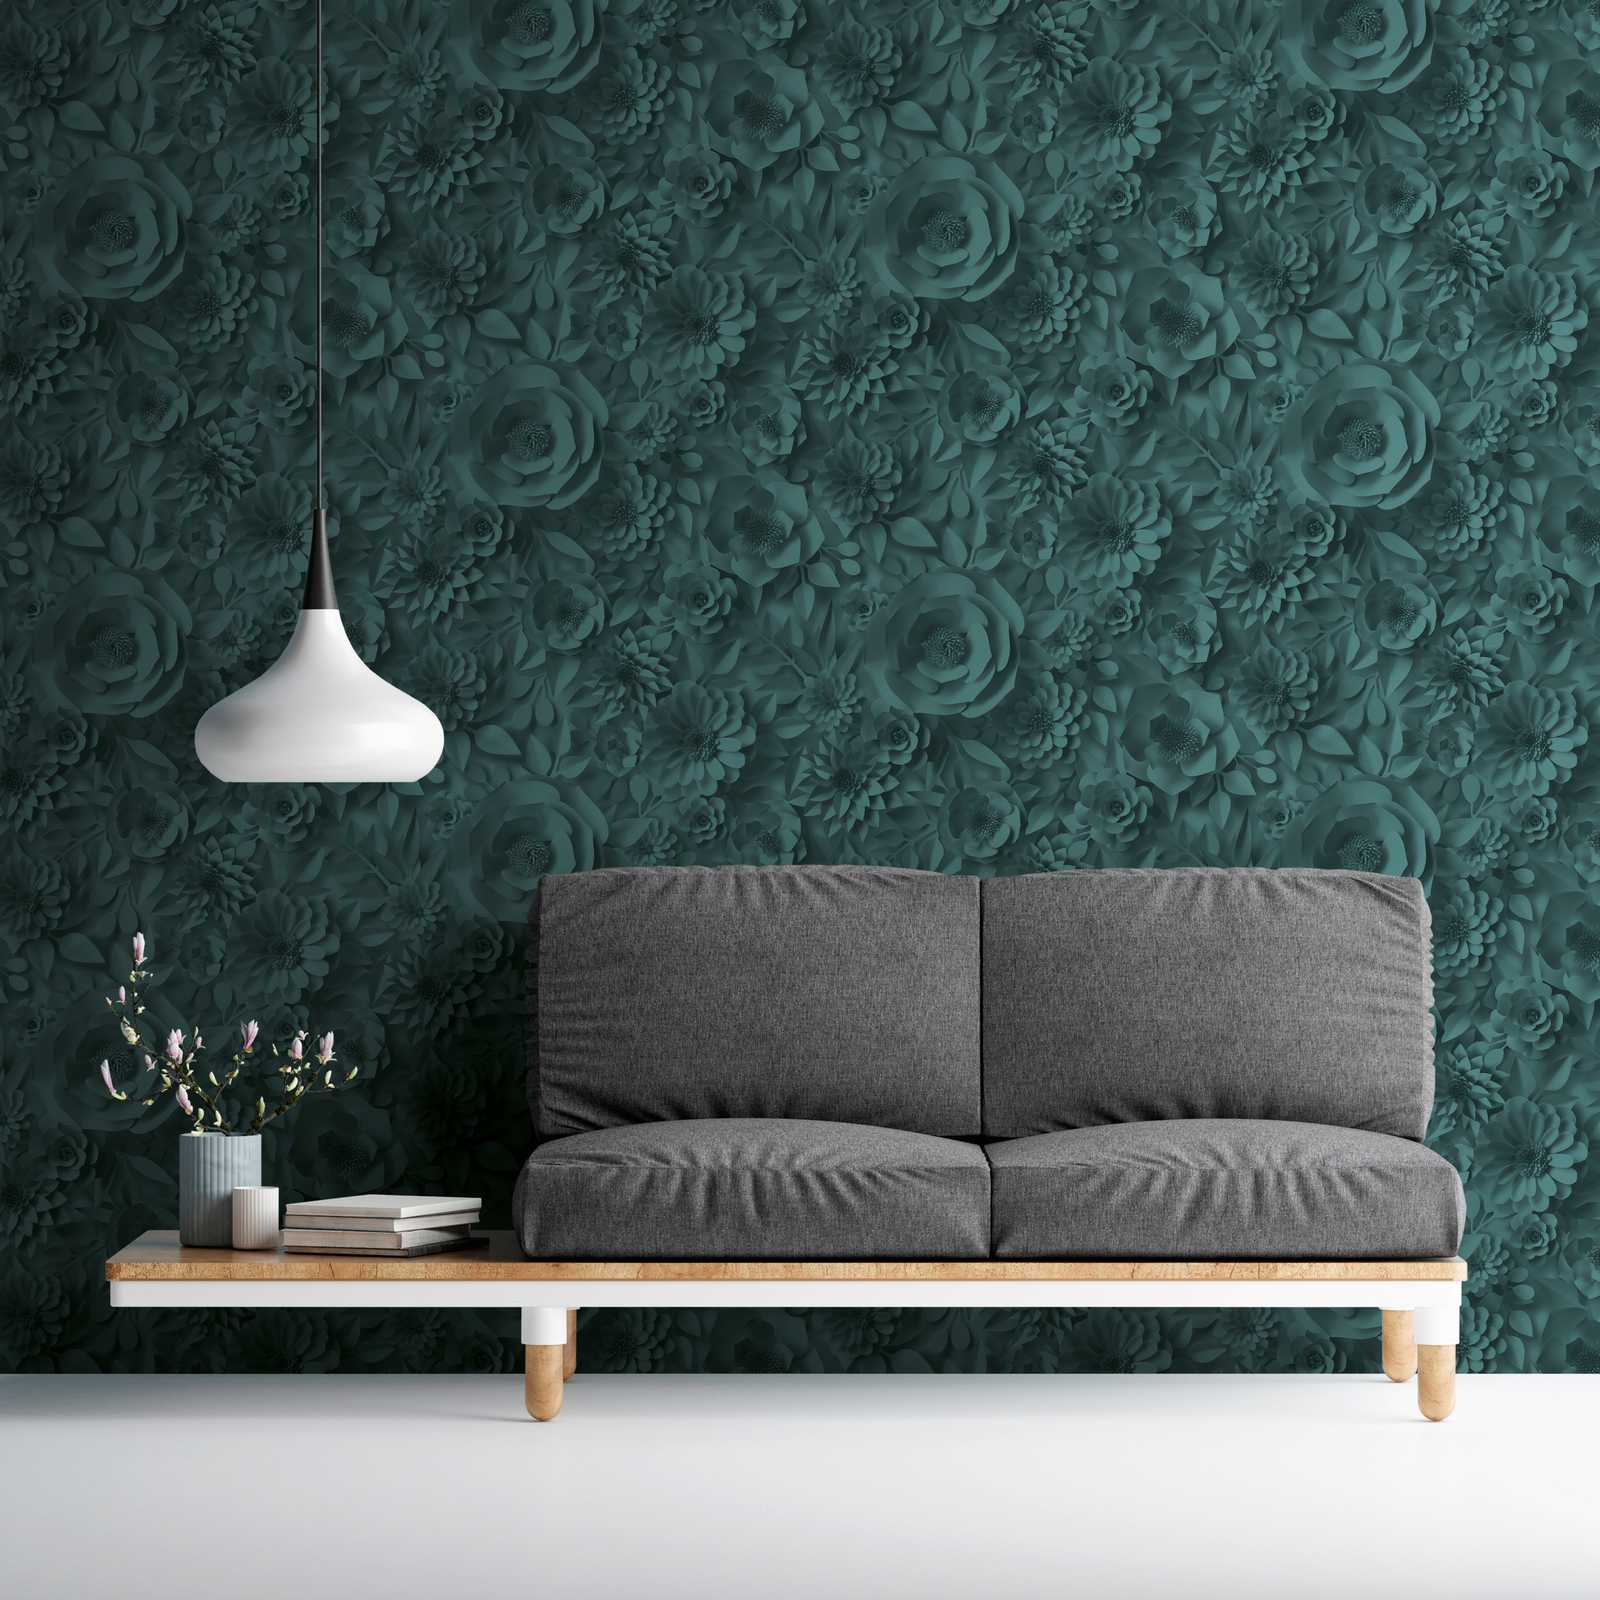             3D wallpaper with paper flowers, graphic floral pattern - green
        